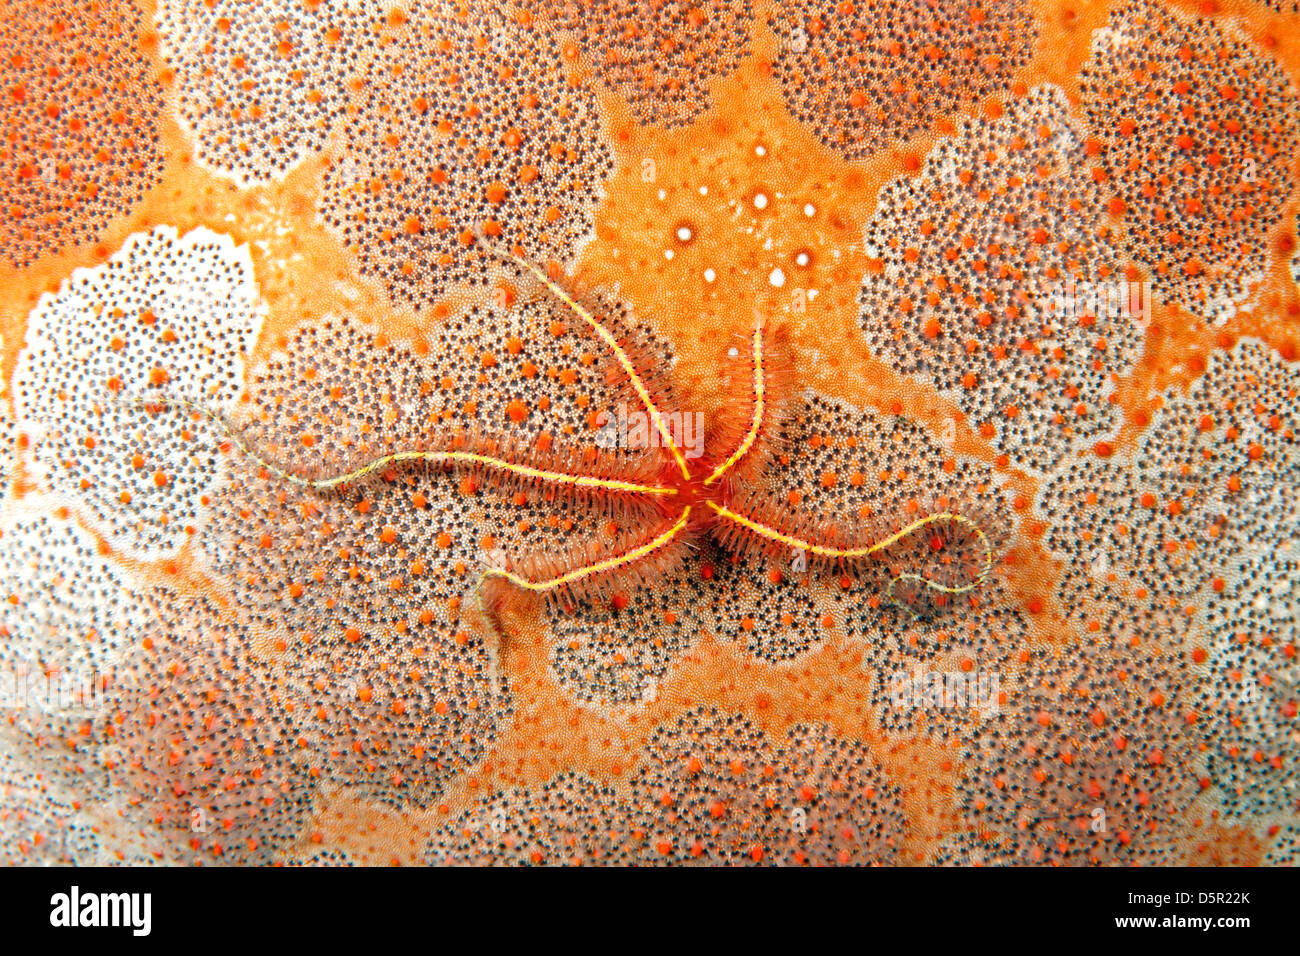 Brittle Star, probably Ophiothrix sp, on the dorsal surface of a Pincushion Sea Star, Culcita novaeguineae. Stock Photo